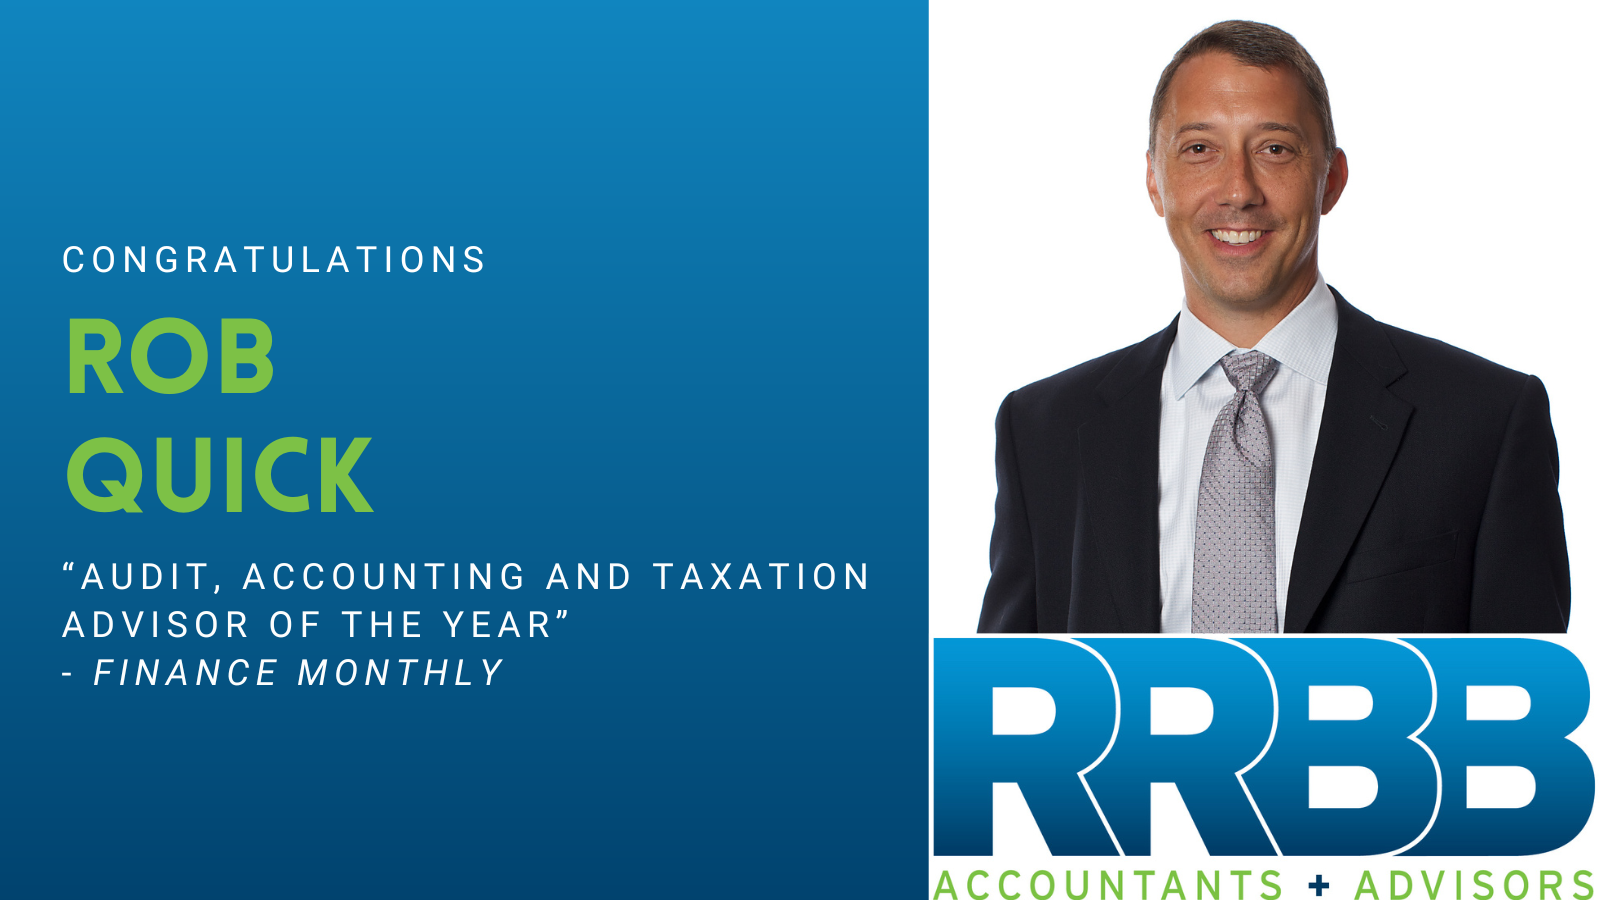 Rob Quick Named “Audit, Accounting and Taxation Advisor of the Year” by Finance Monthly Magazine Image